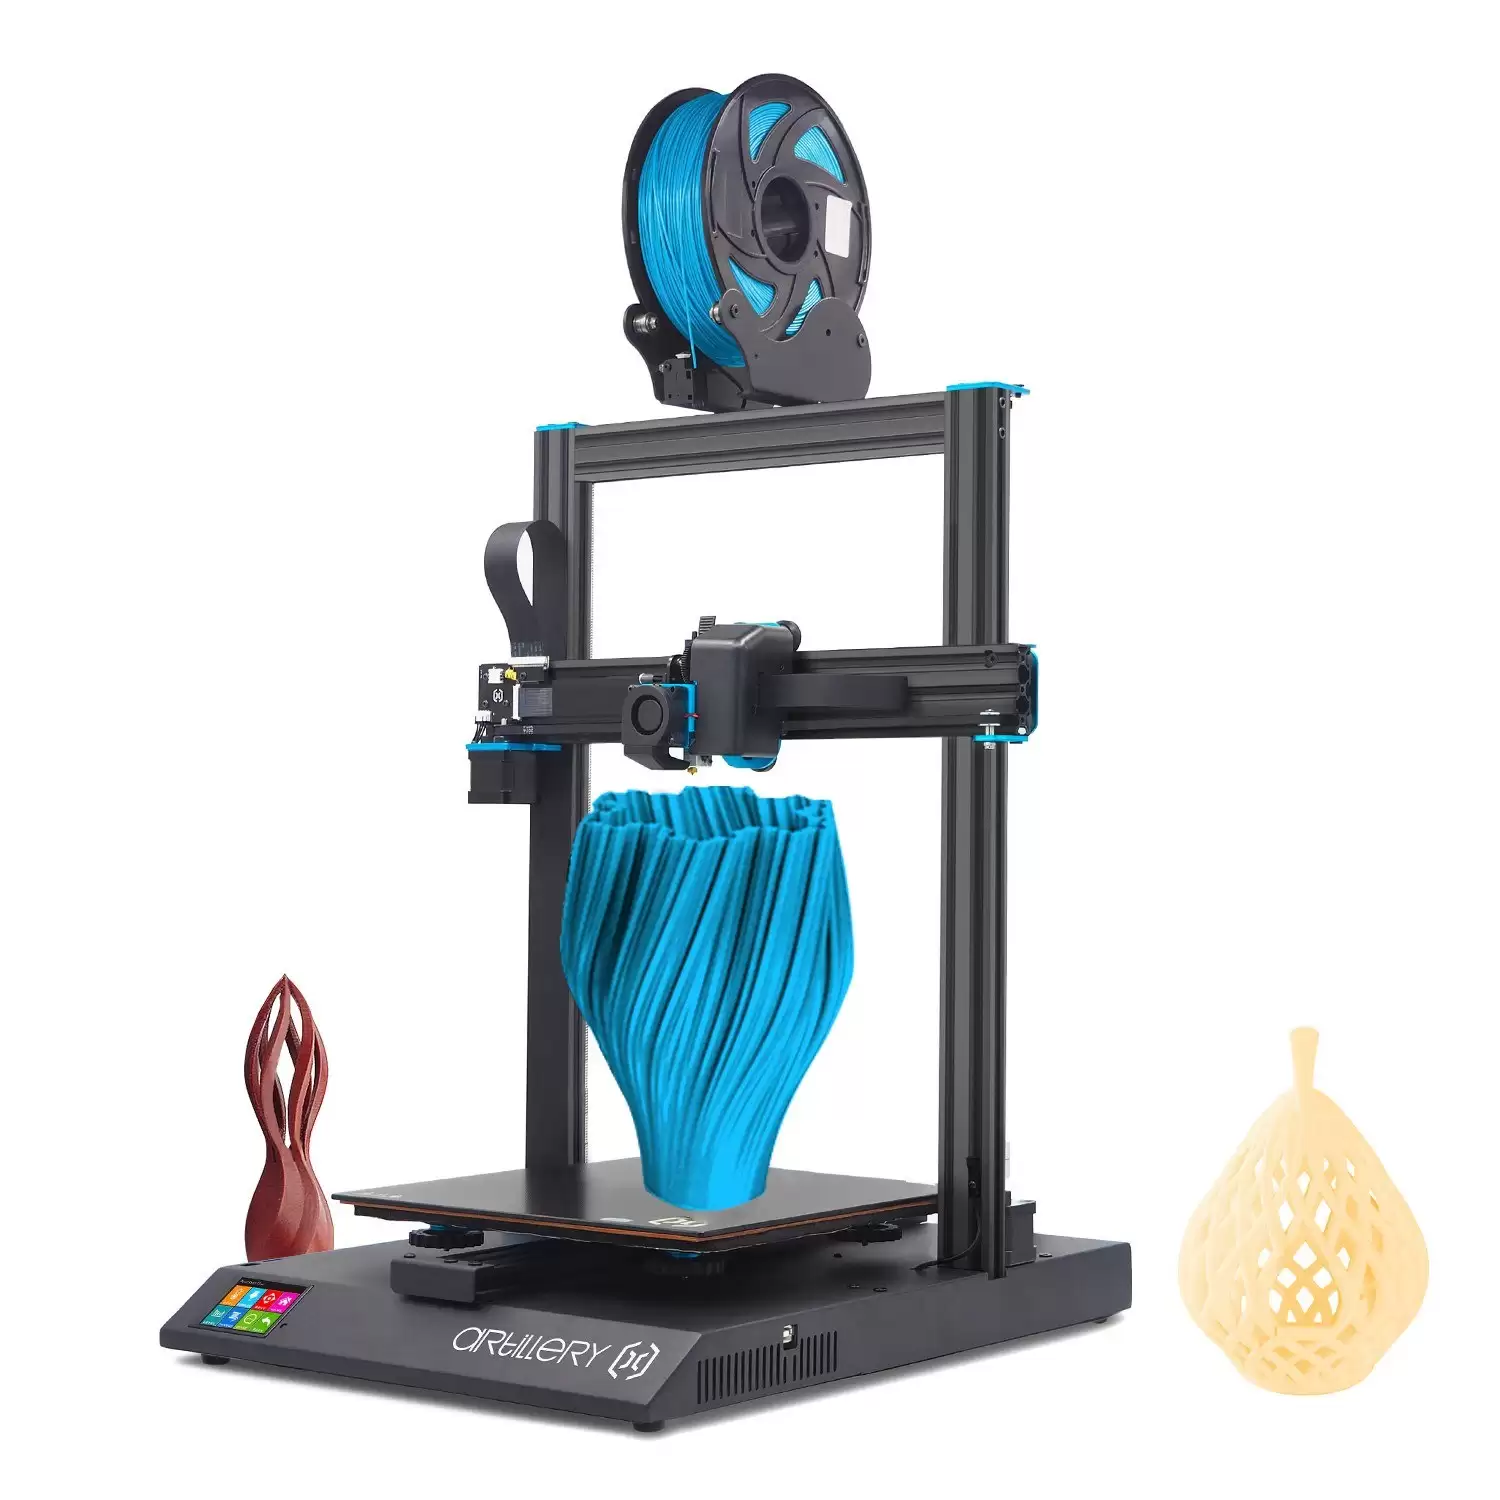 Get Extra 30% Discount On Artillery Swx1 3d Printer High Precision Diy Kit With This Discount Coupon At Tomtop